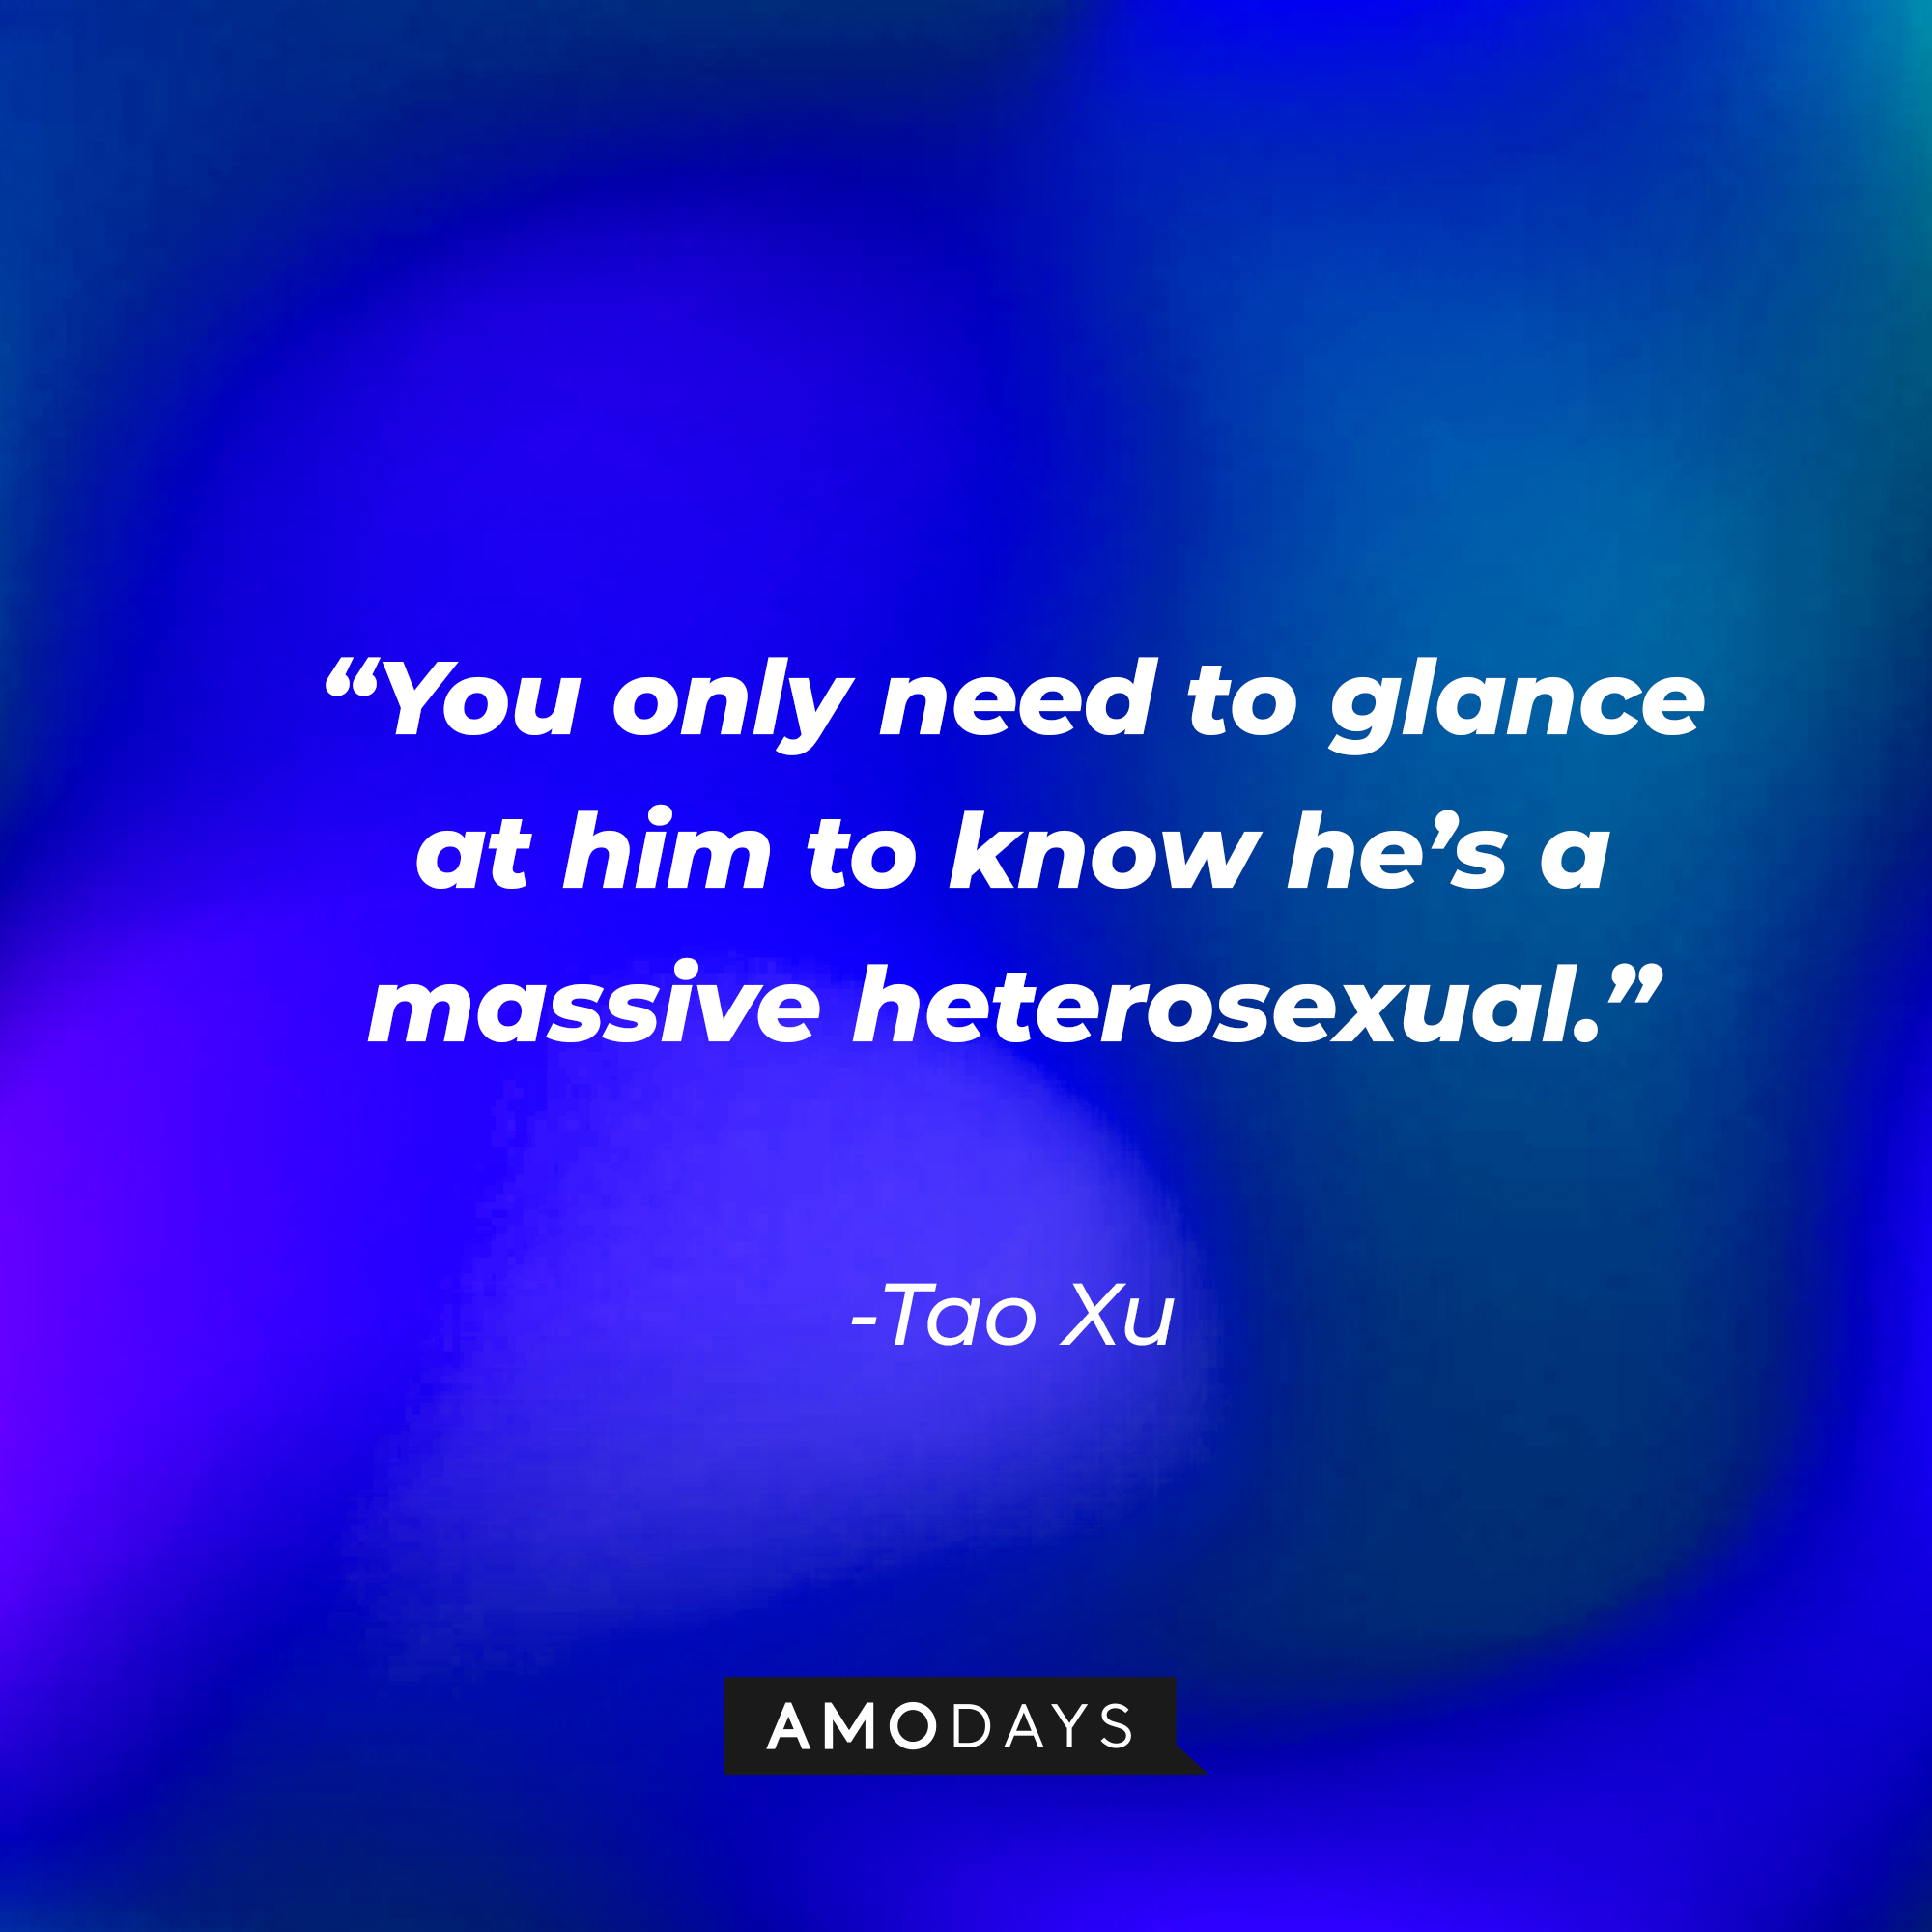 Tao Xu’s quote: “You only need to glance at him to know he’s a massive heterosexual.” | Source: AmoDays